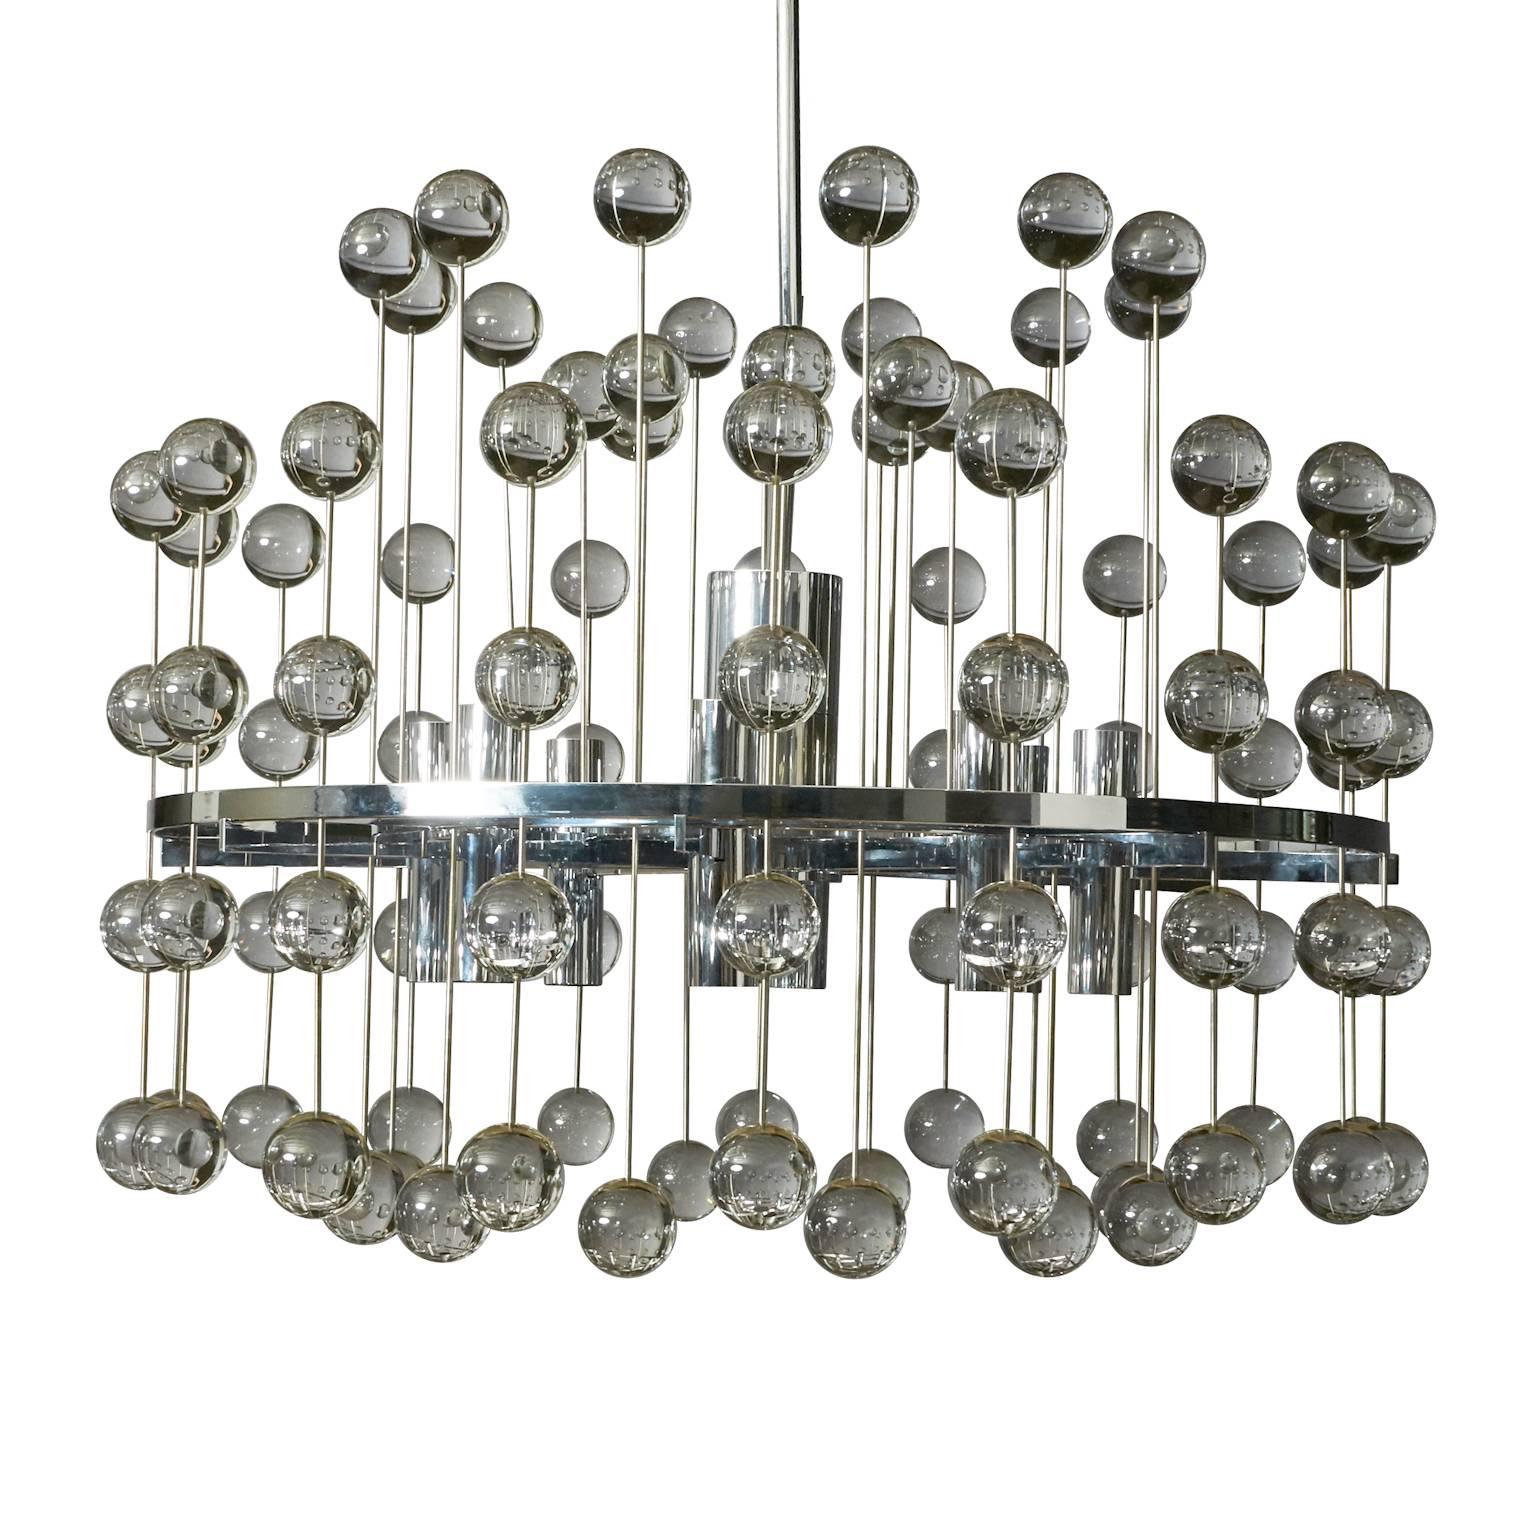 A chandelier by Aloys Gangkofner. Chrome frame with glass balls in varying heights.